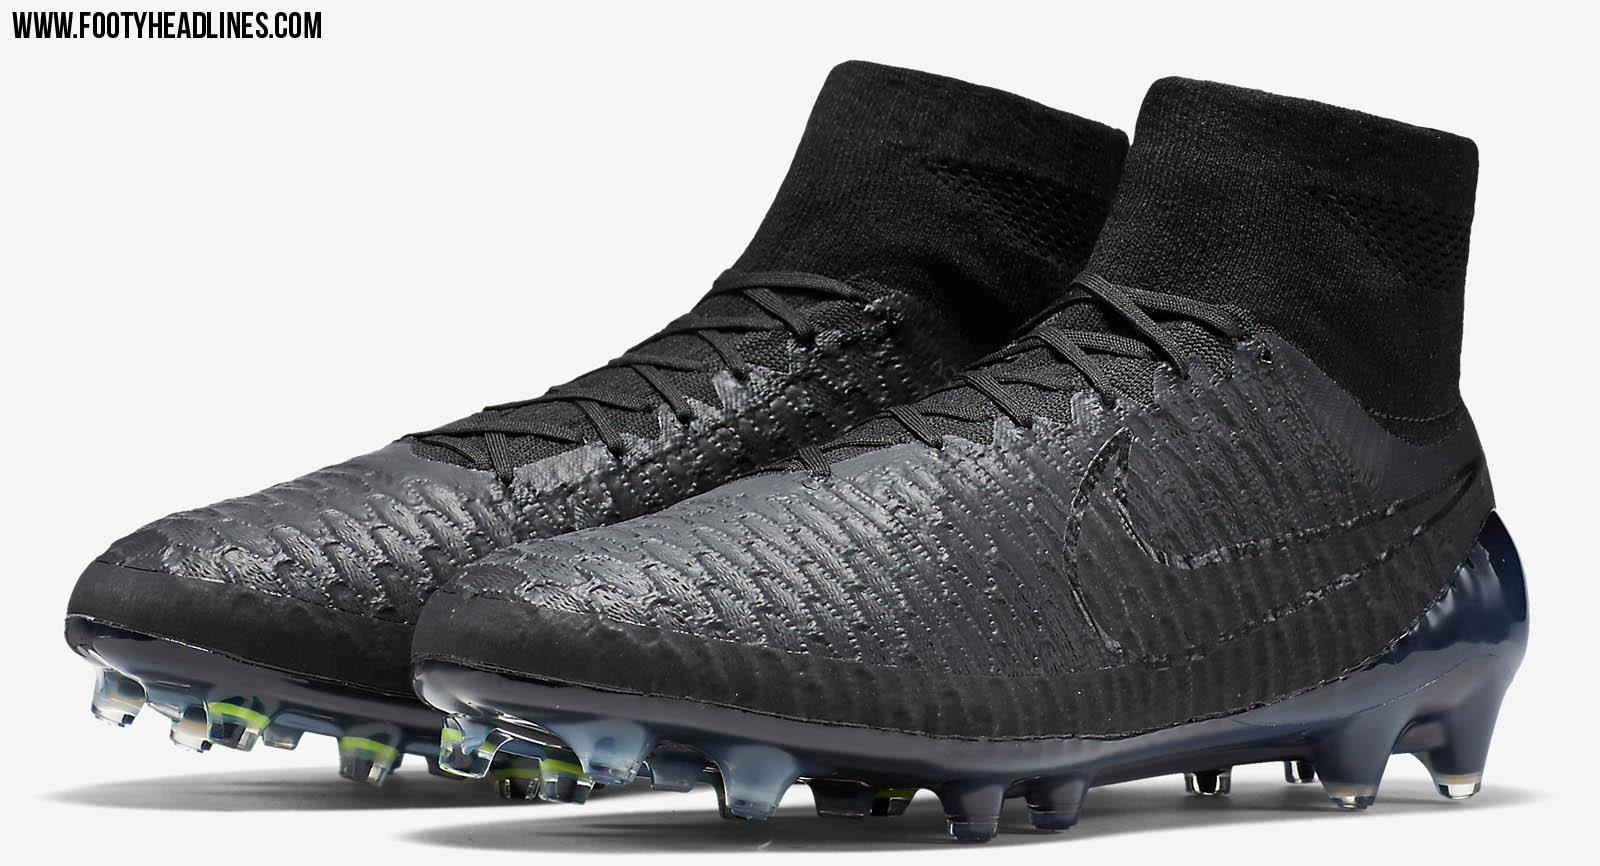 Blackout Reflective Magista Obra Academy Pack Boots Released - Footy Headlines